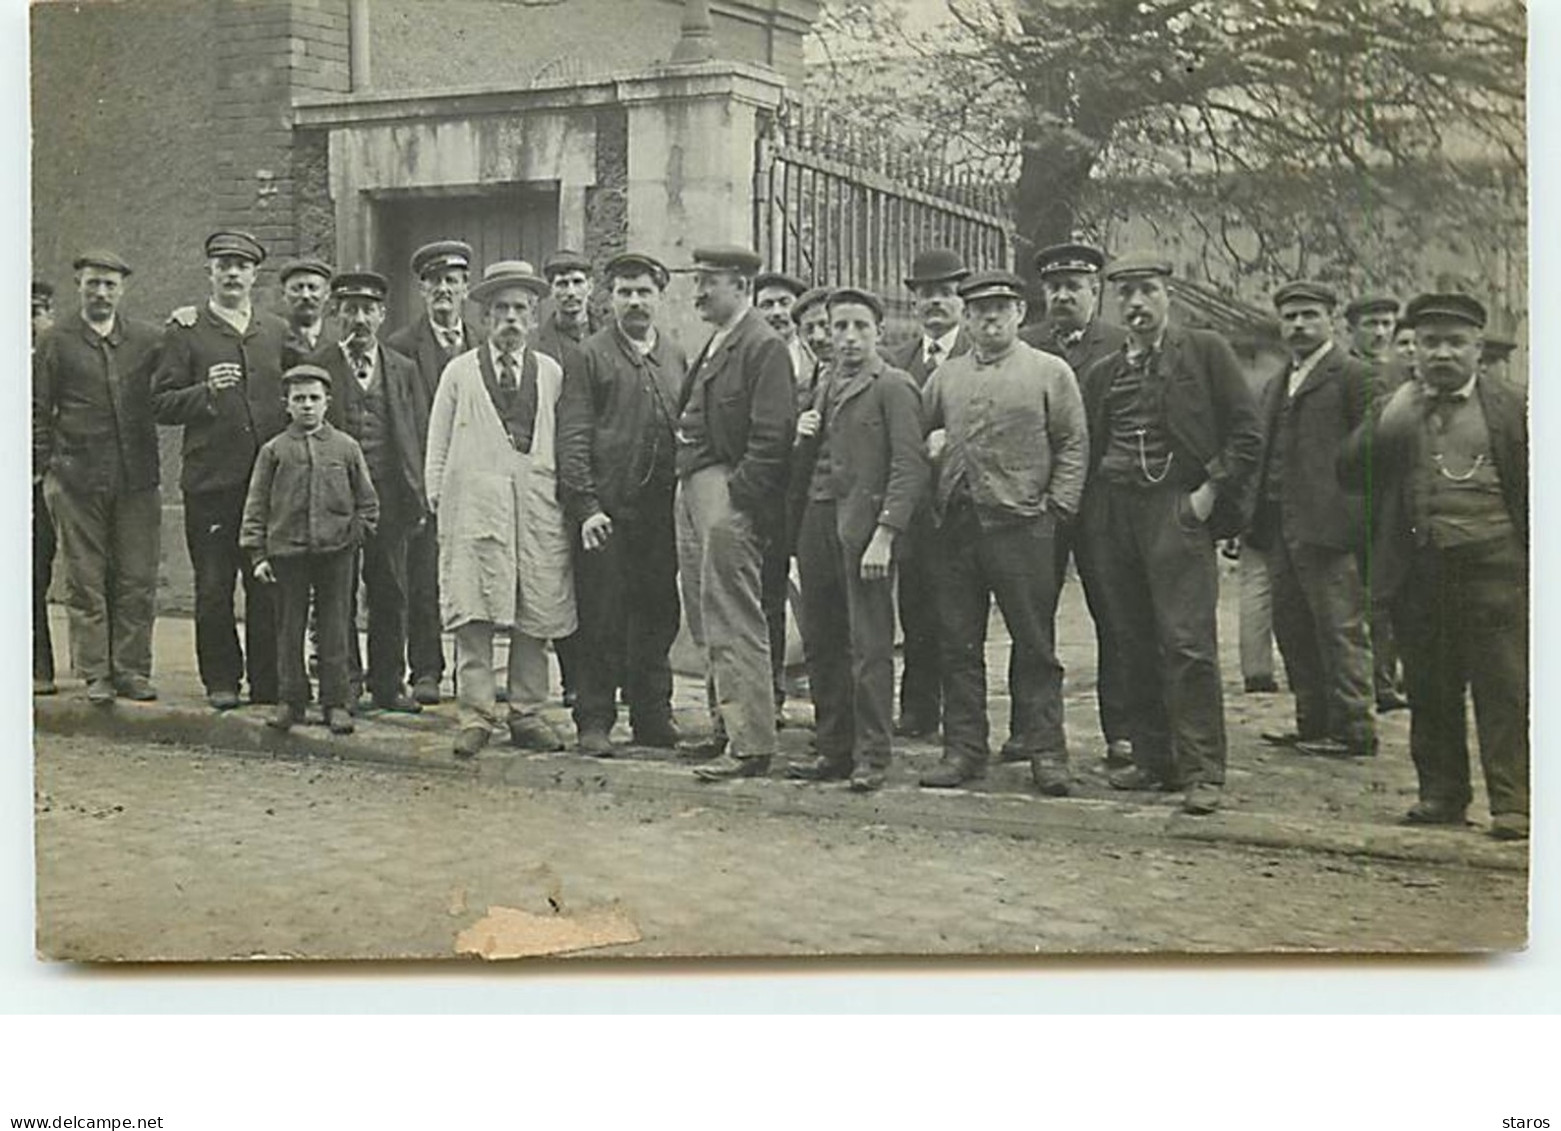 Carte-Photo - Groupe D'hommes - To Identify